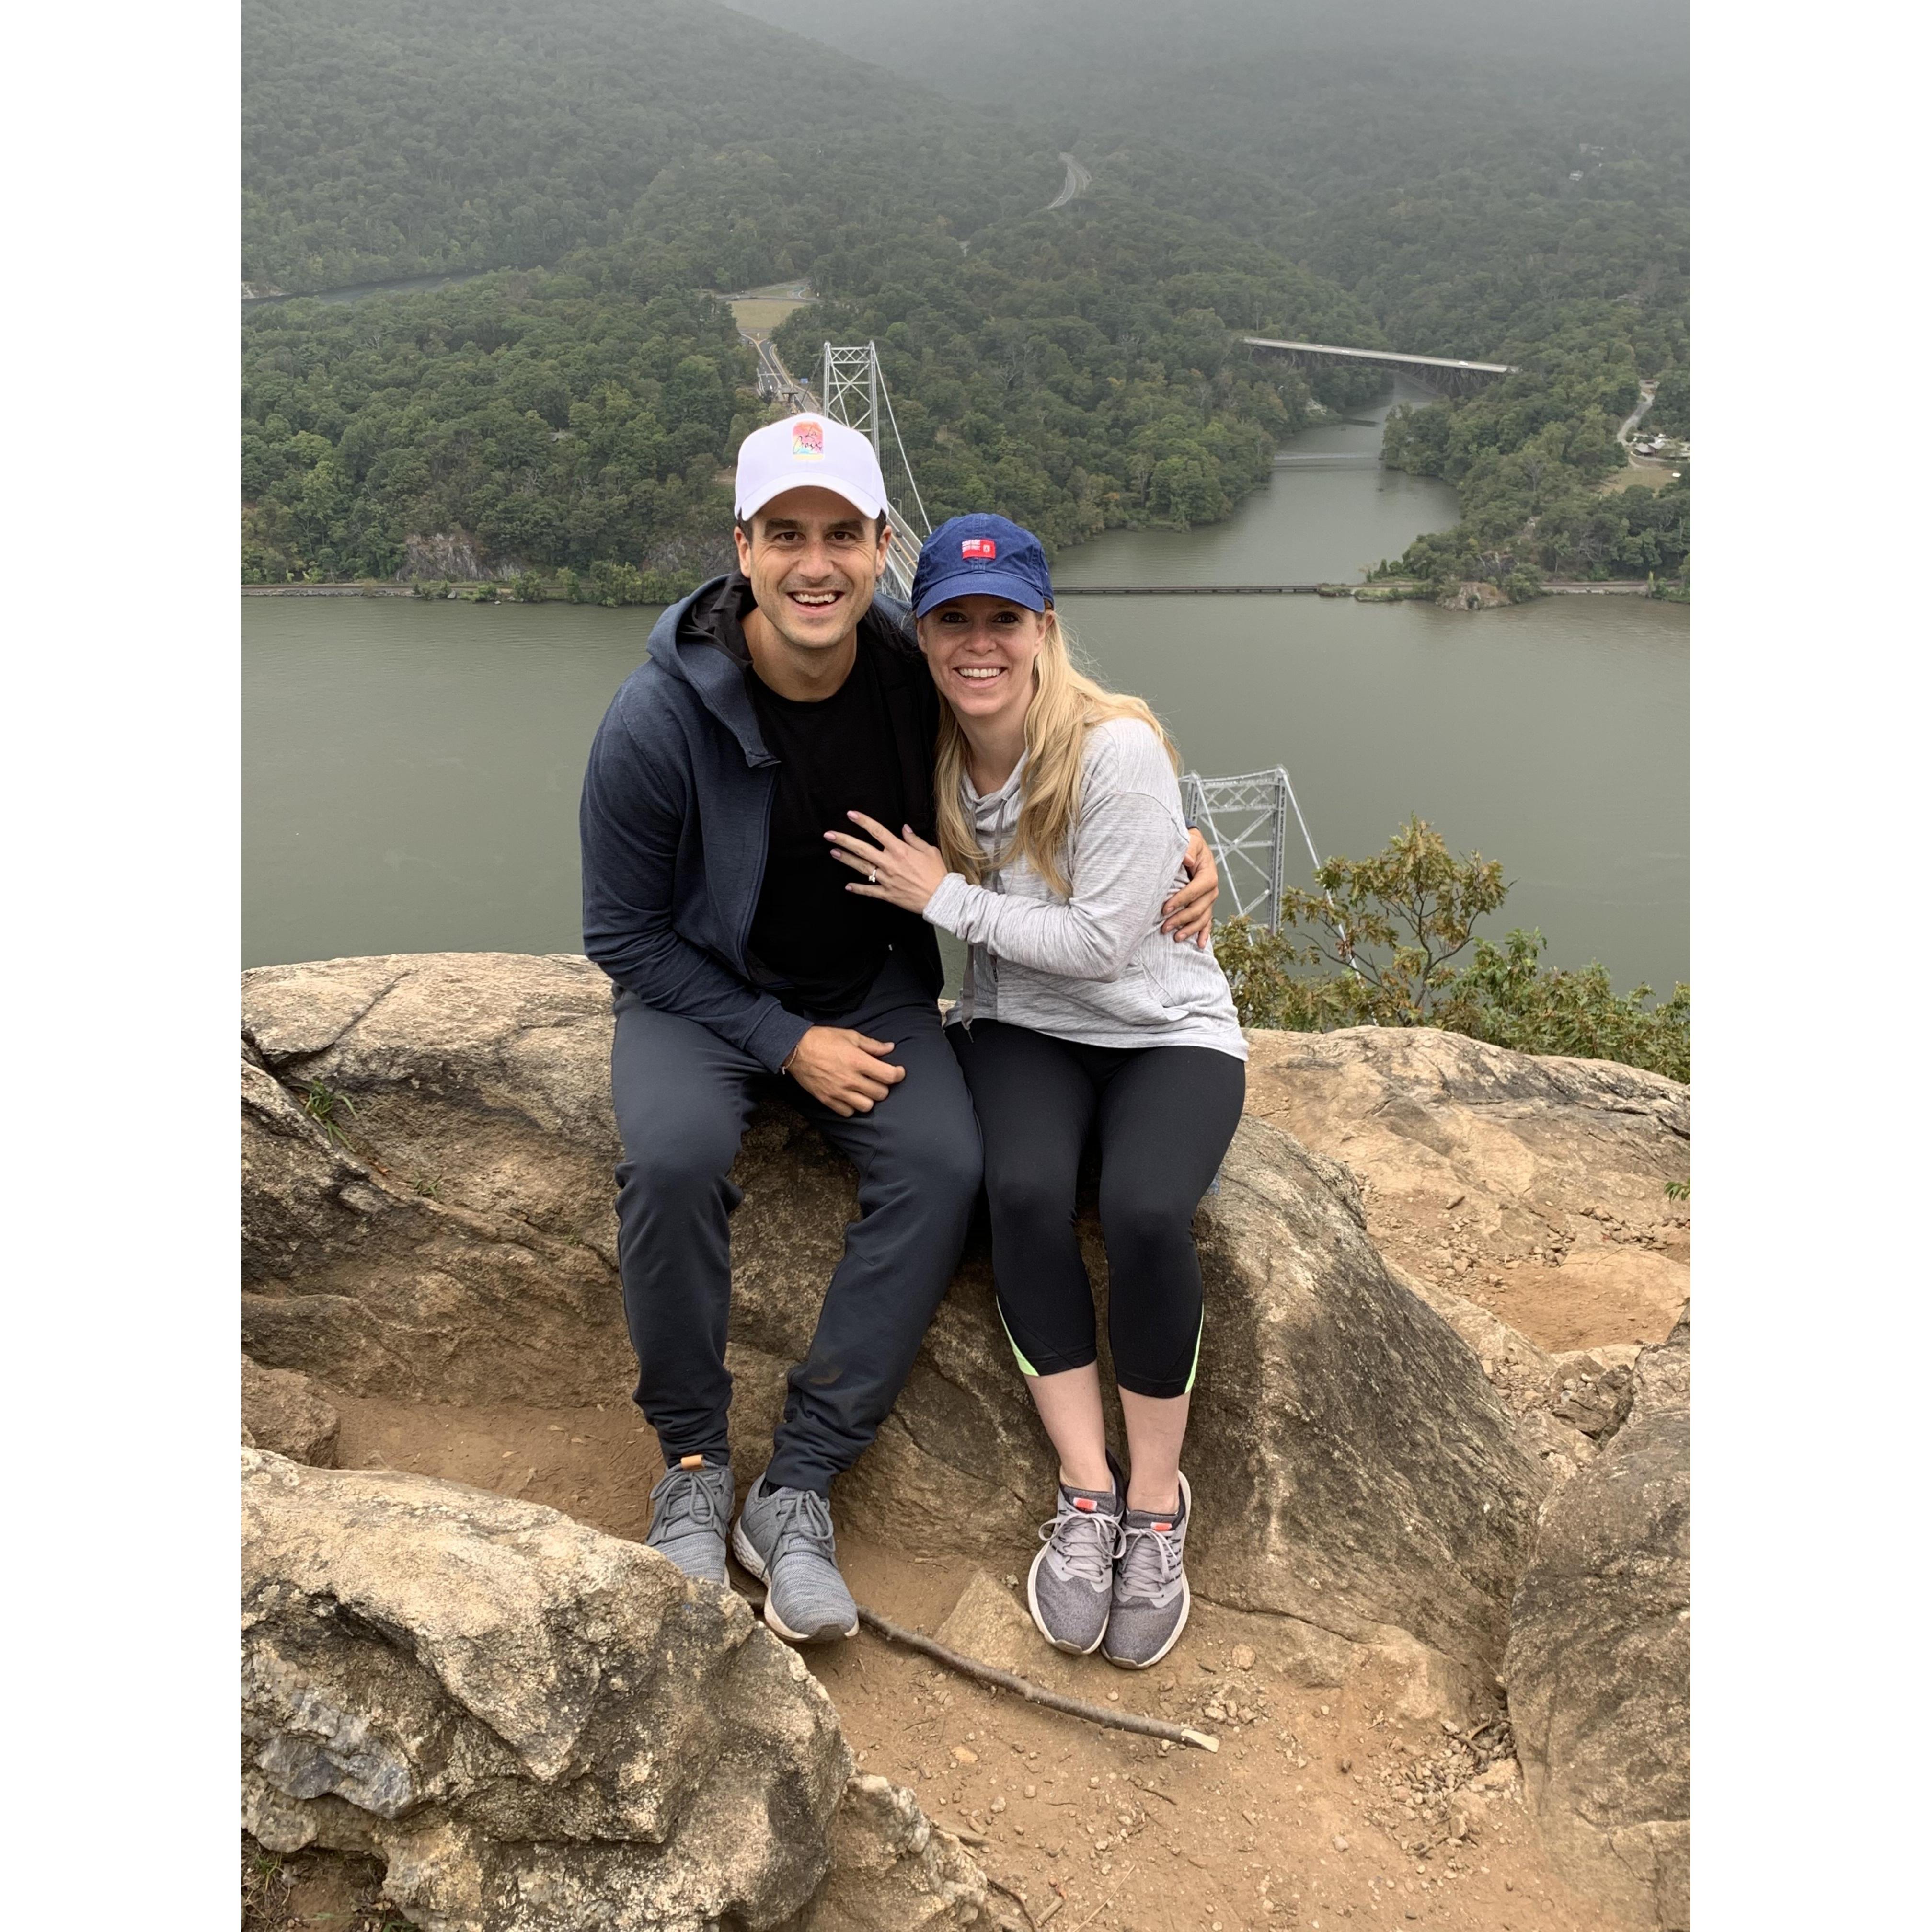 Our engagement on top of Bear Mountain